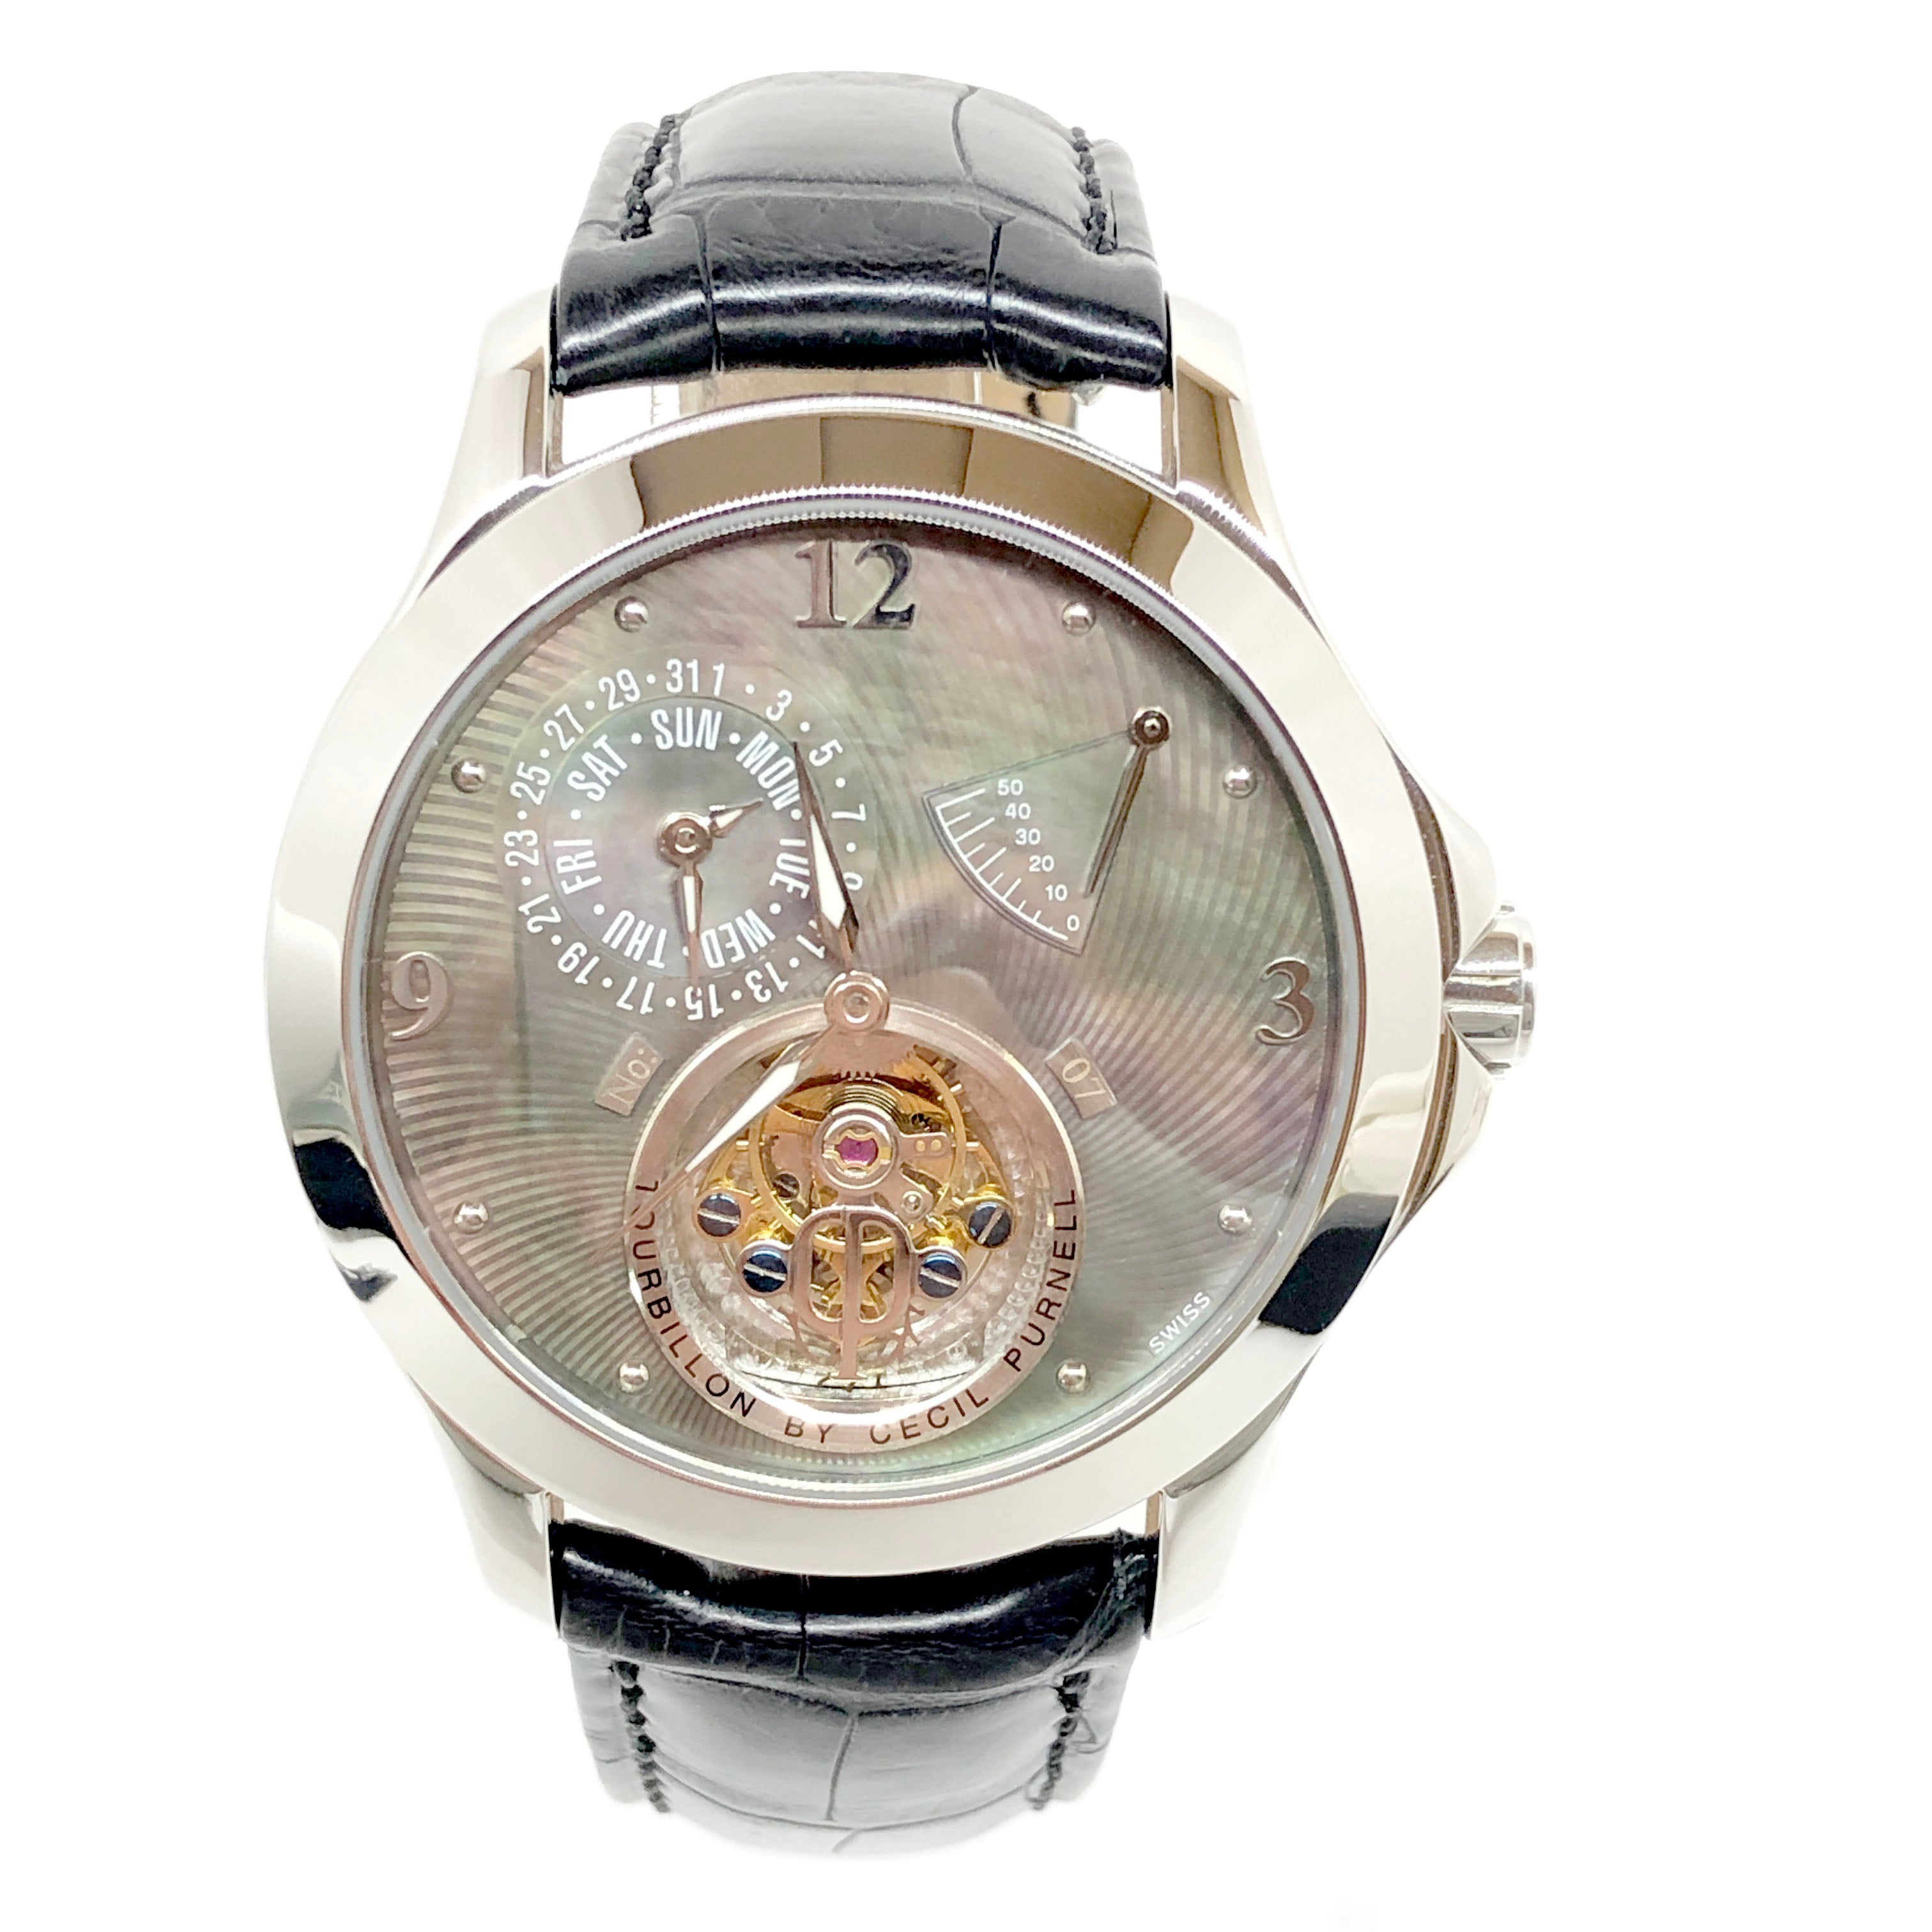 Cecil Purnell Tourbillon Stainless Steel Watch Limited Edition, 30230 – AN  LUXURY WATCHES